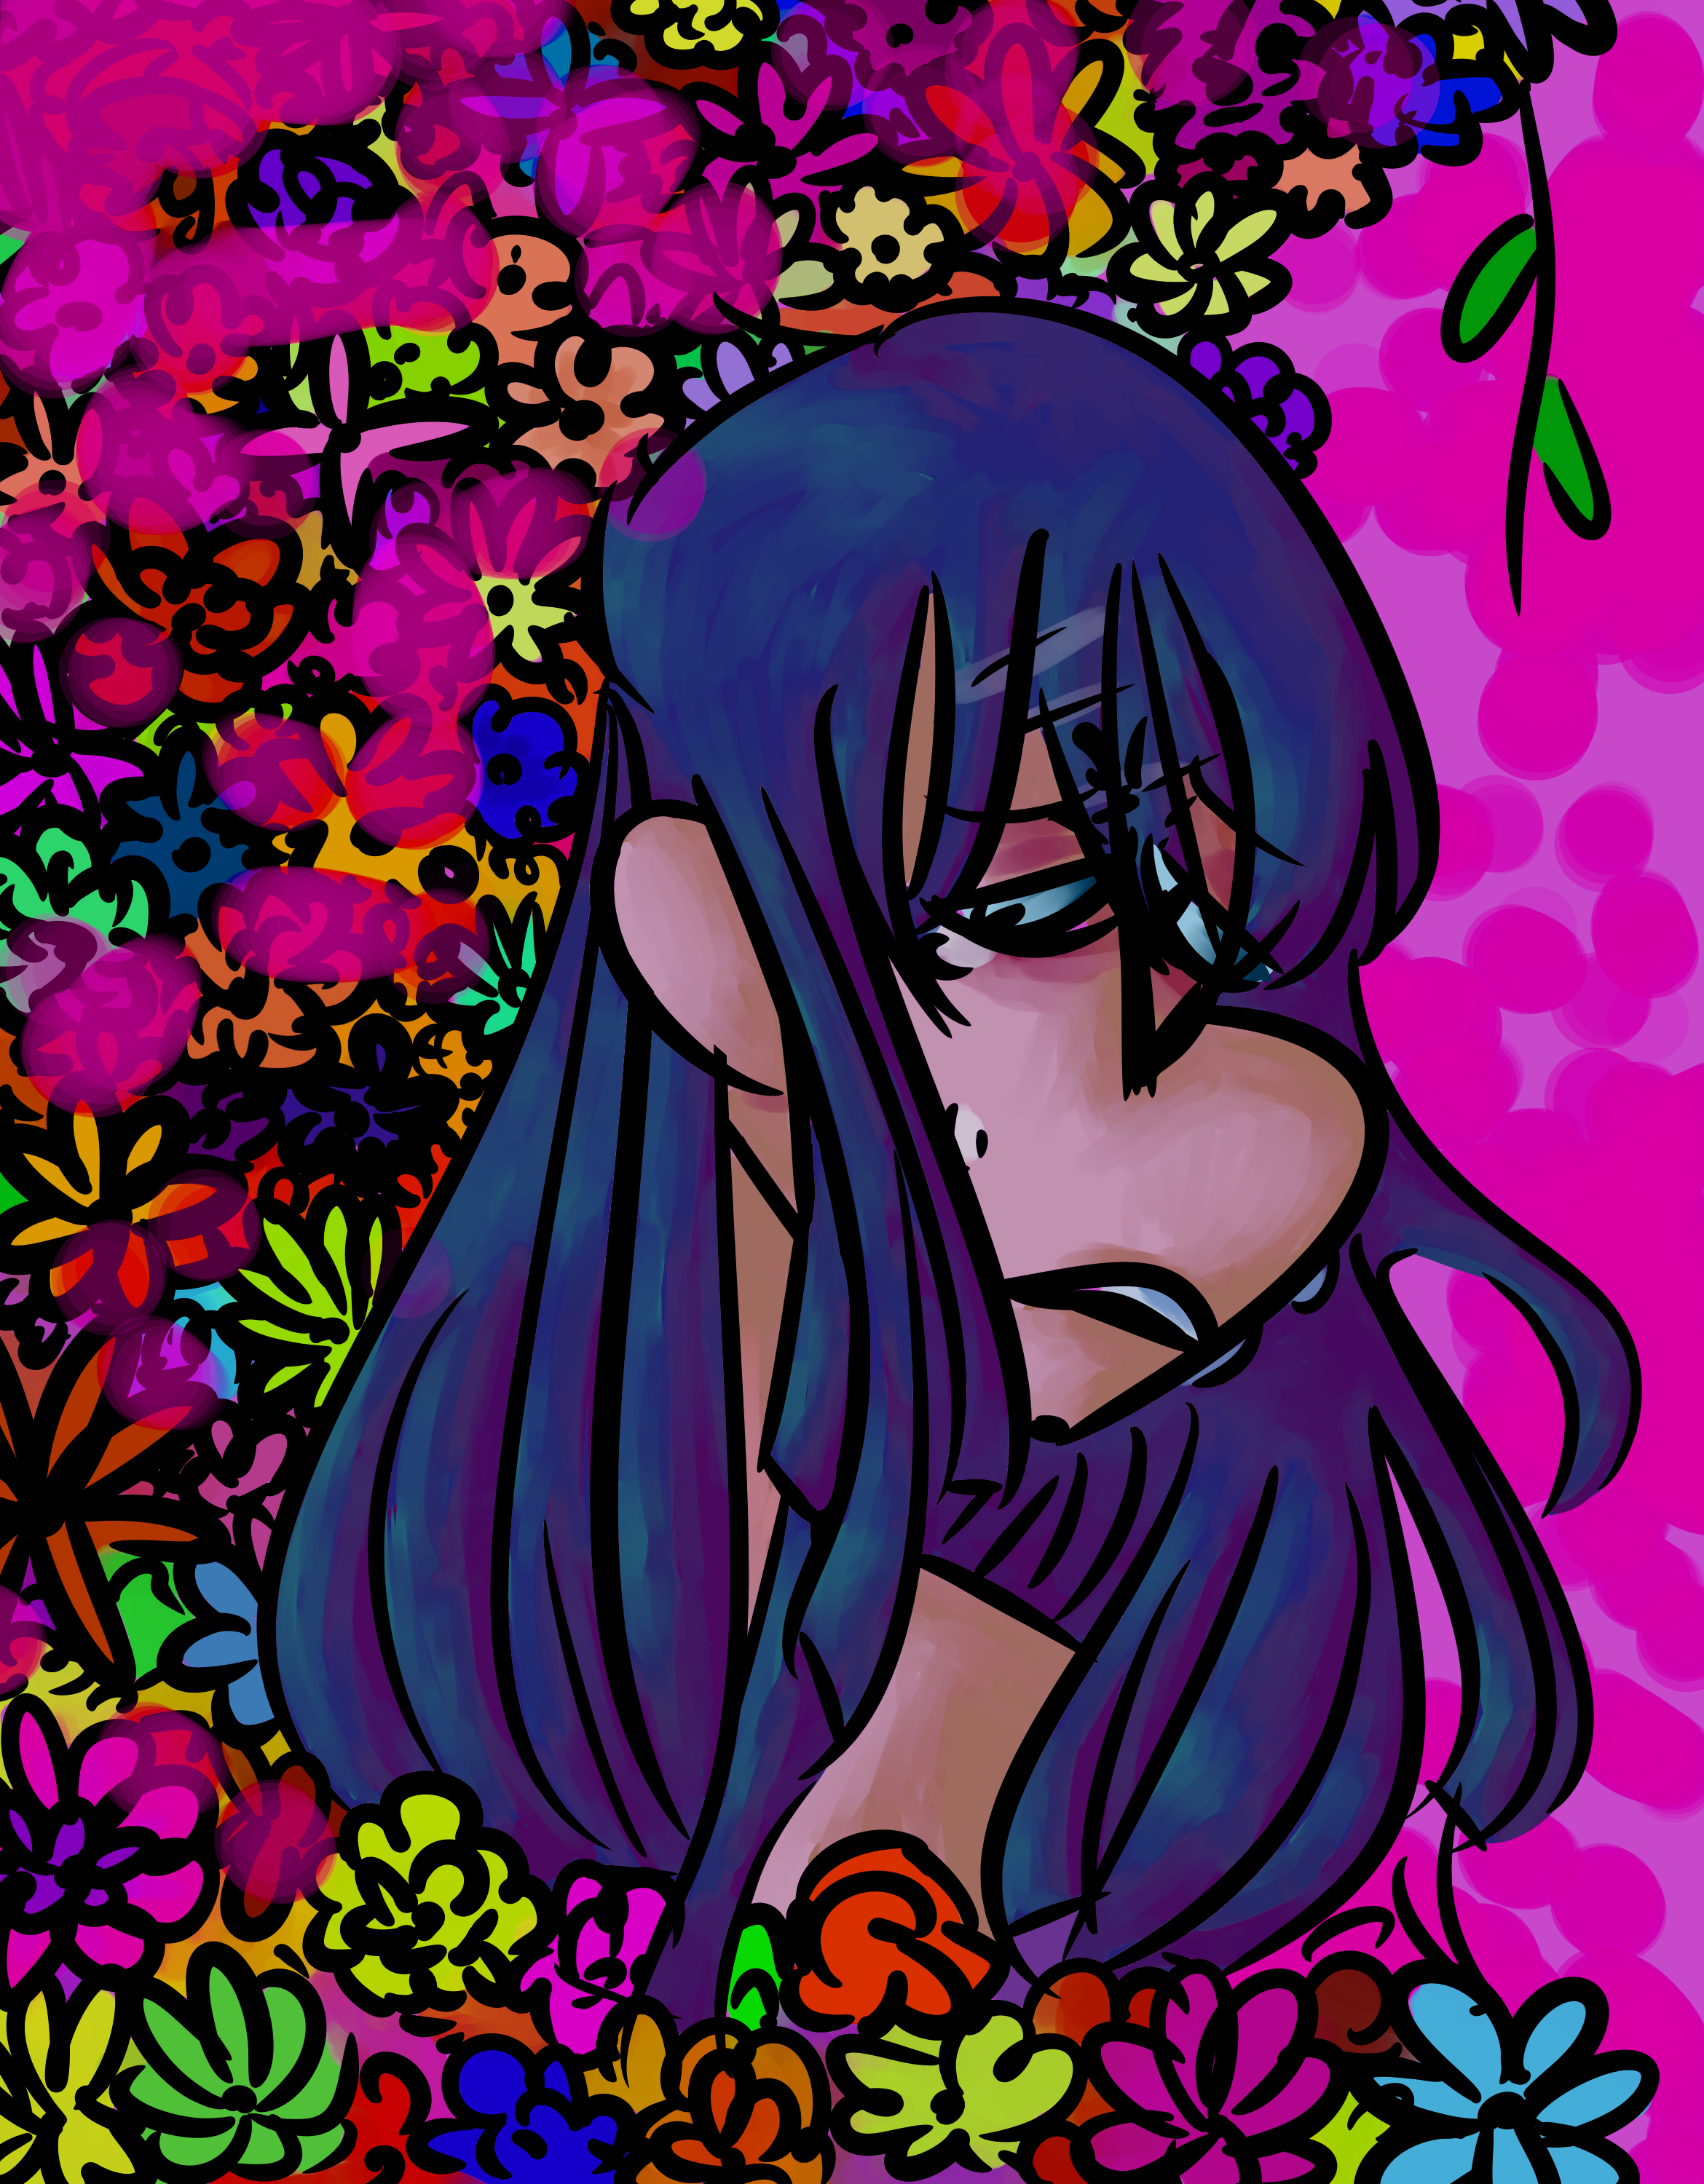 A sad girl, surrounded by flowers.